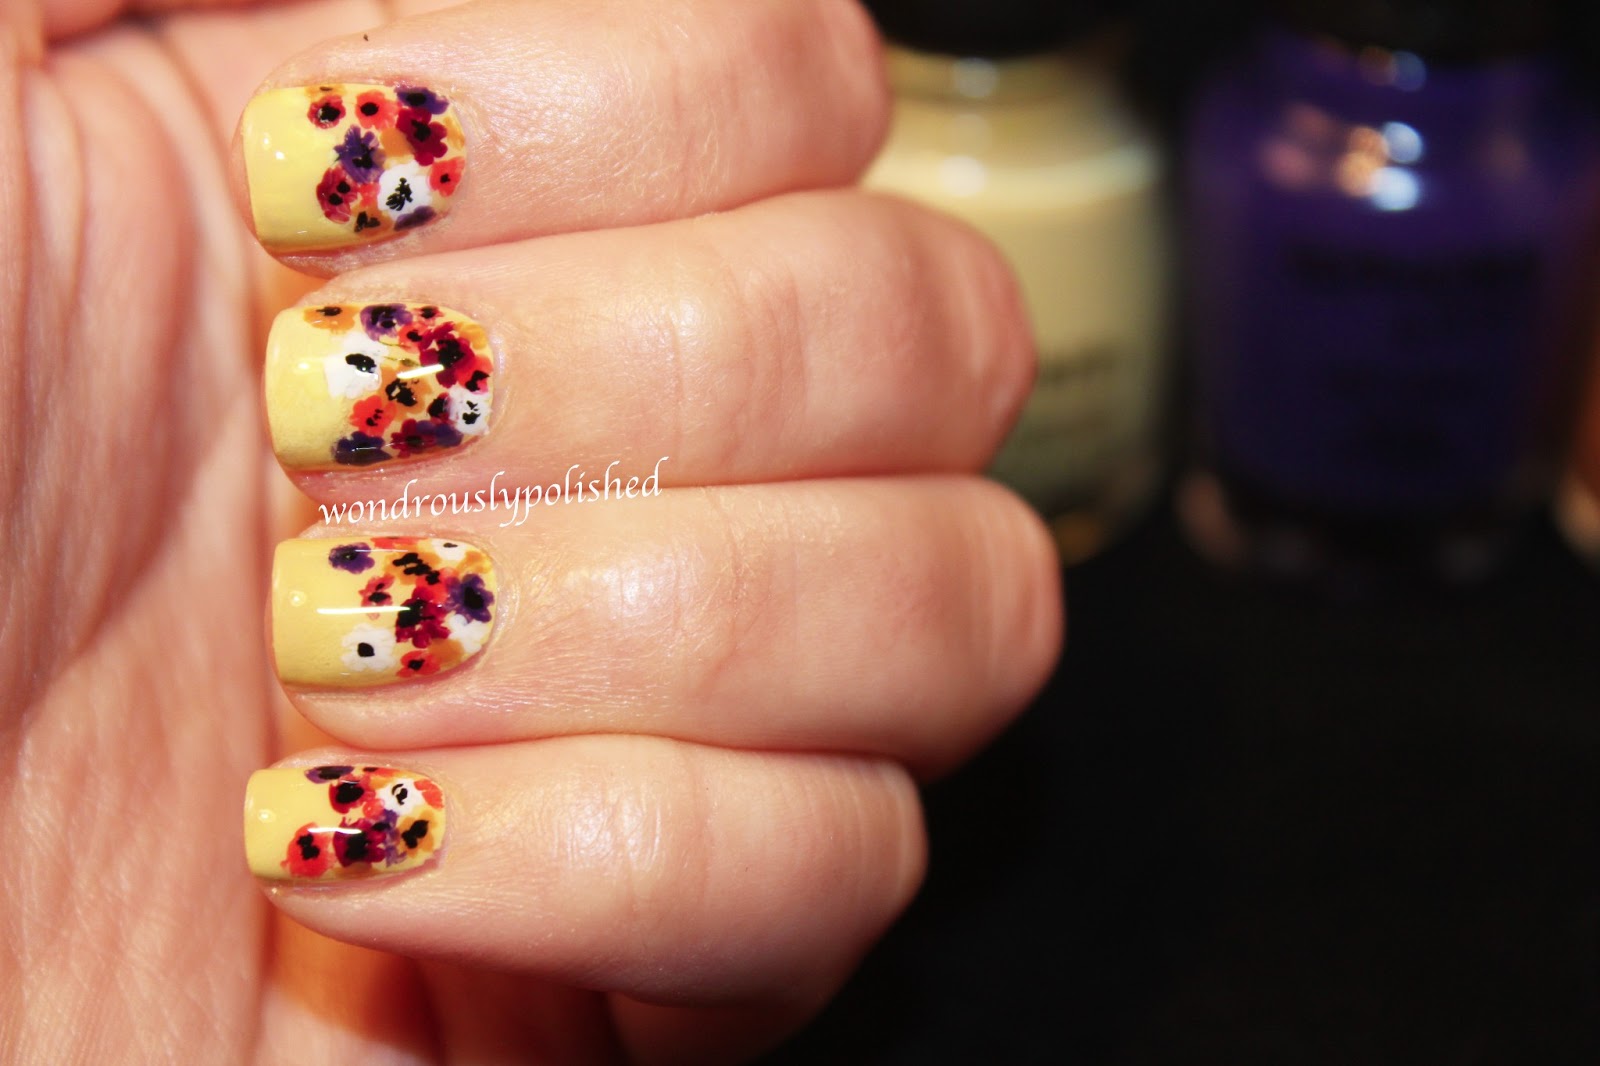 February Nail Art Designs with Flowers - wide 6